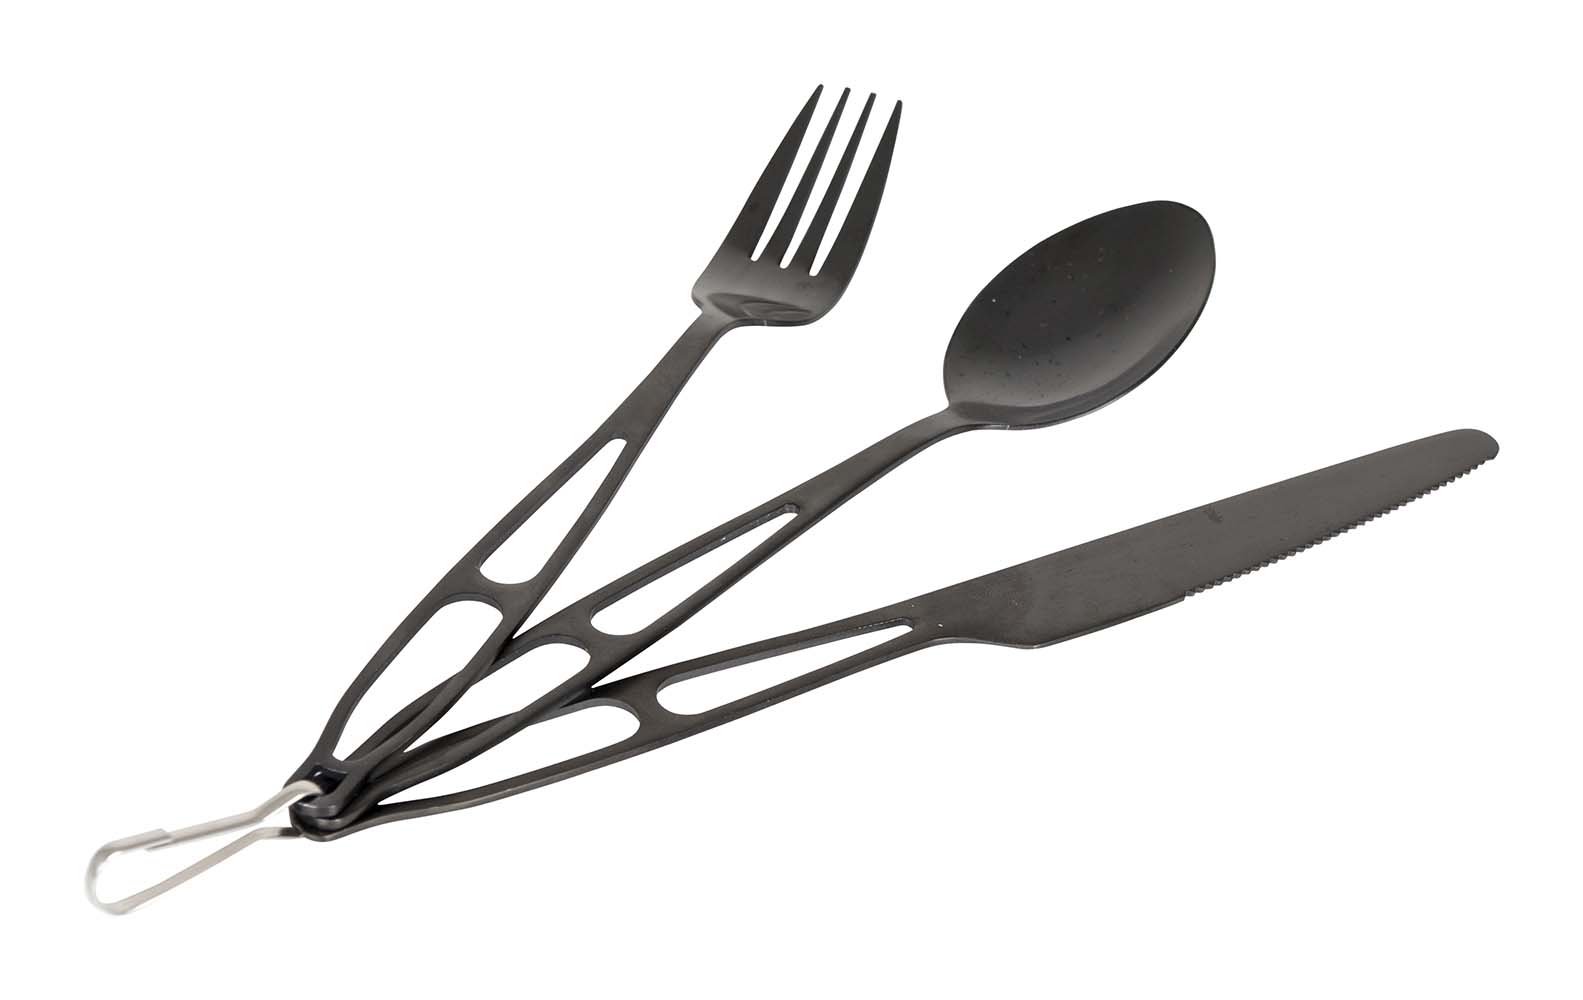 6102140 A 3-piece outdoor cutlery set in a handy pouch. The cutlery set is made of stainless steel and therefore ideal for outdoor use.